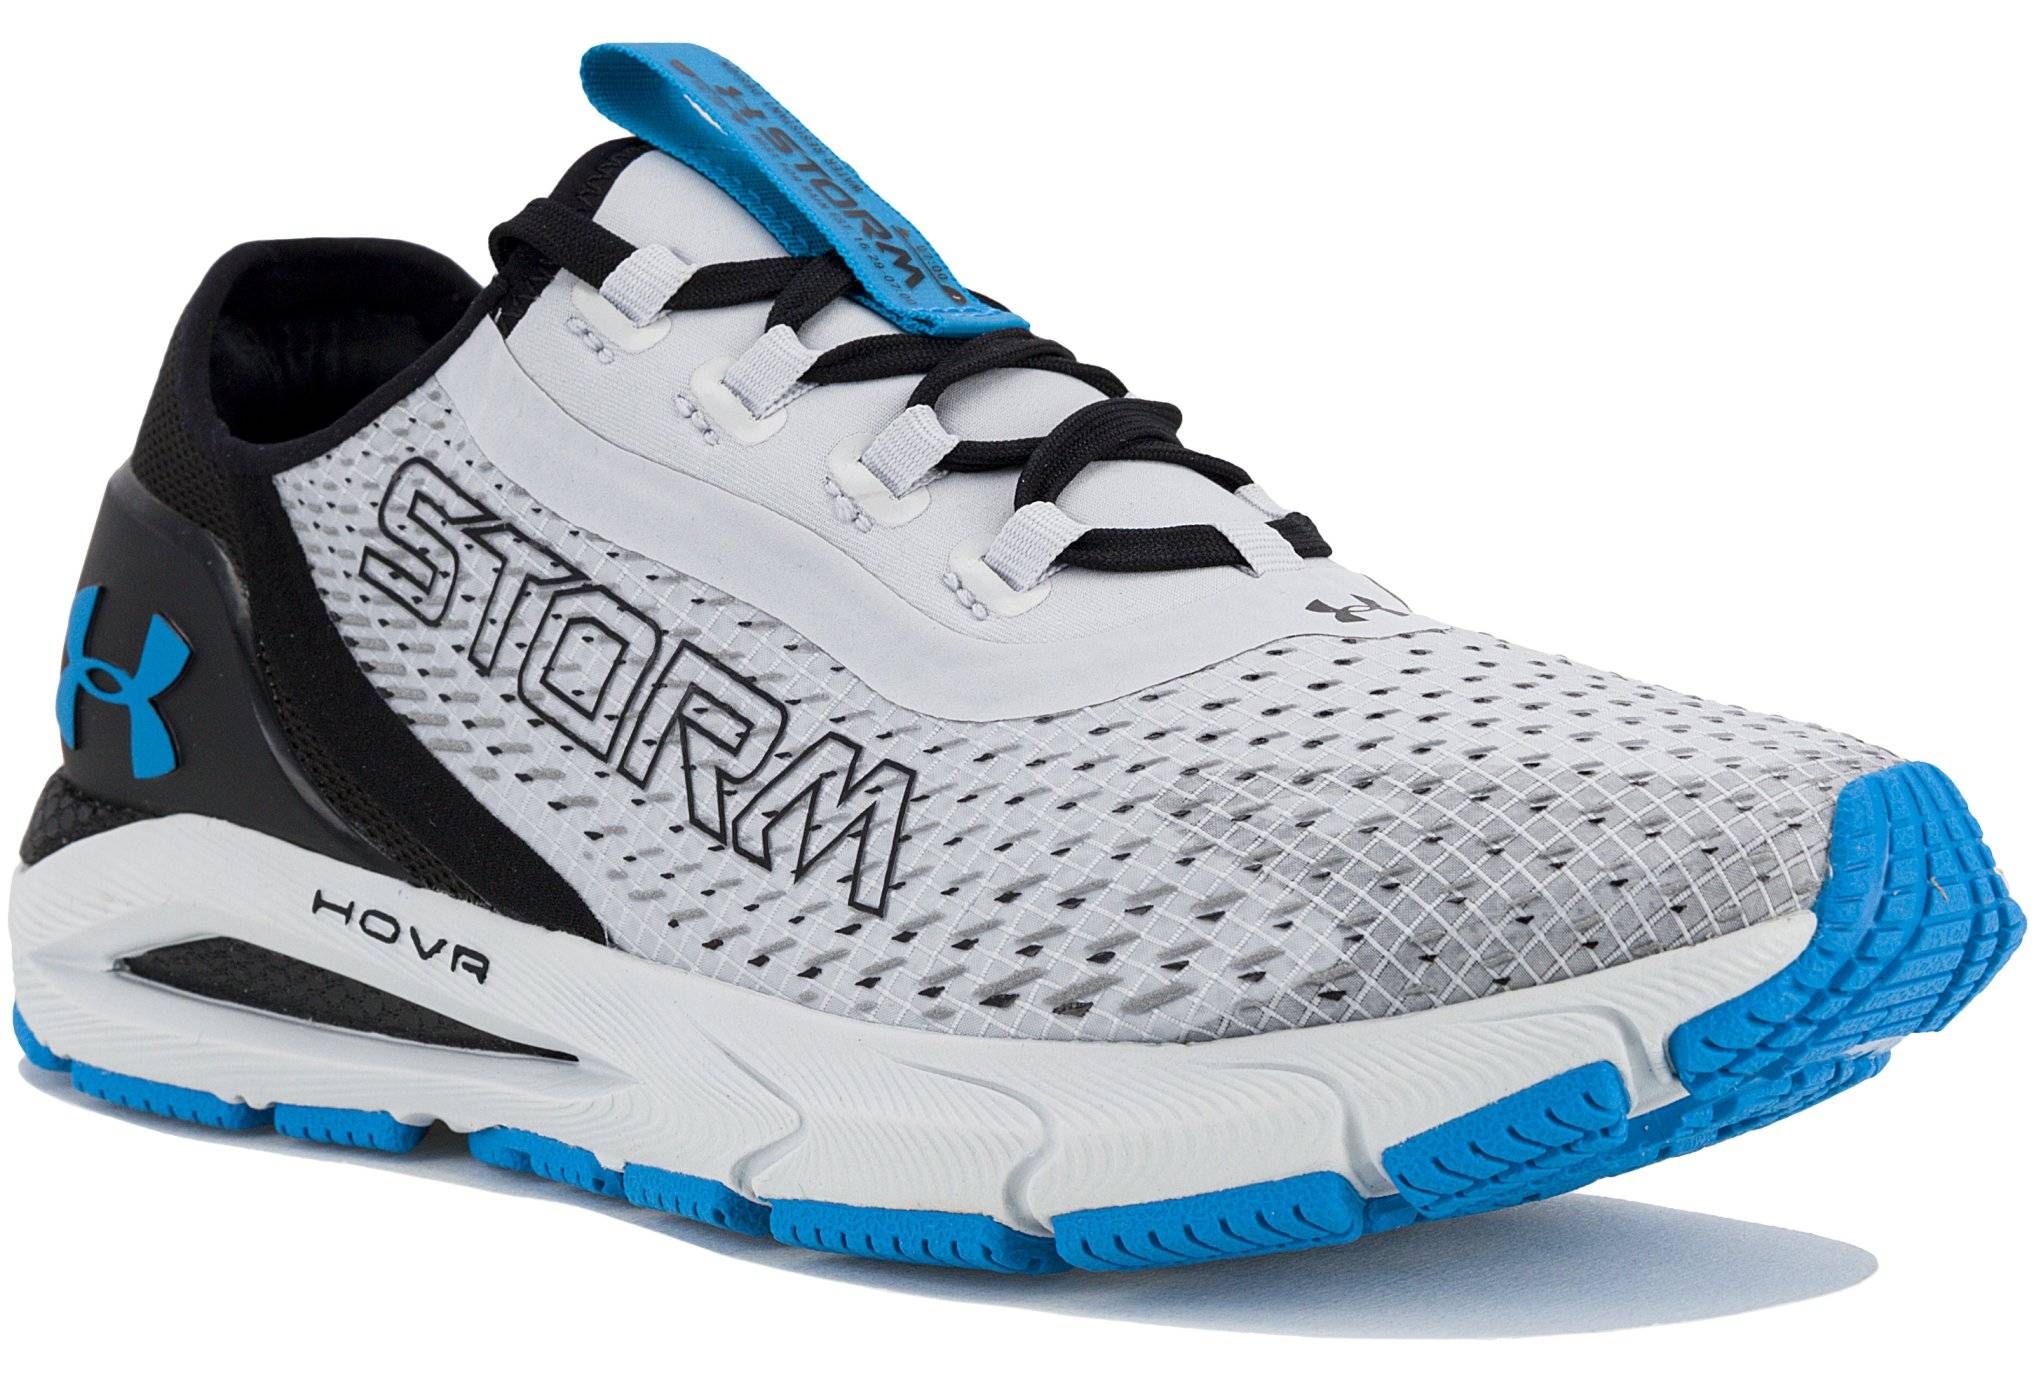 Under Armour HOVR Sonic 4 Storm W 